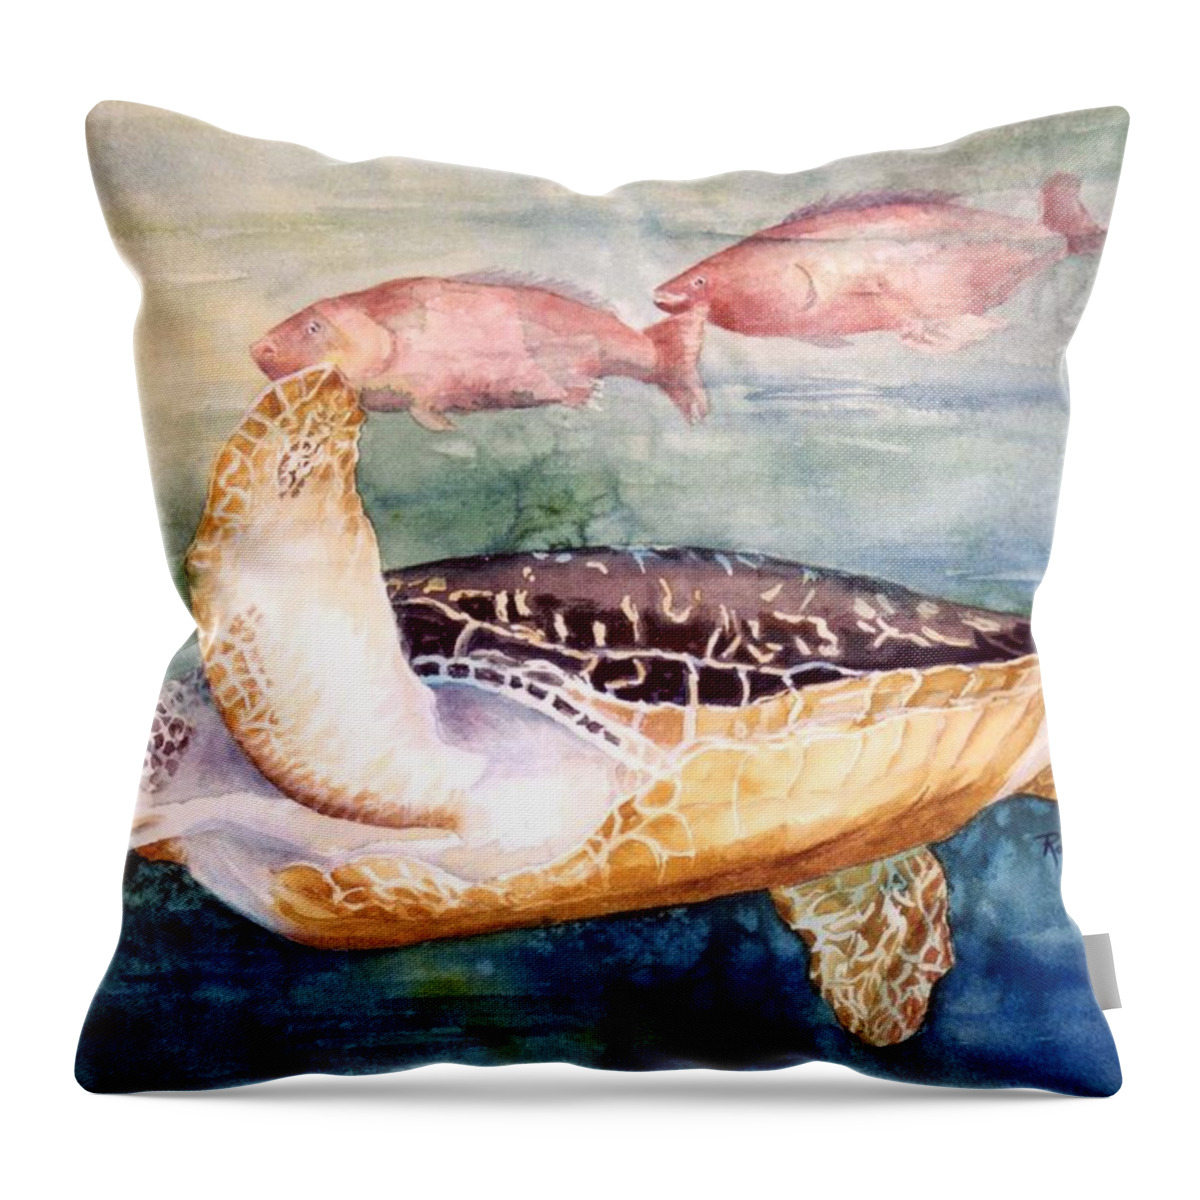 Sea Turtle Throw Pillow featuring the painting Determined - Loggerhead Sea Turtle by Roxanne Tobaison